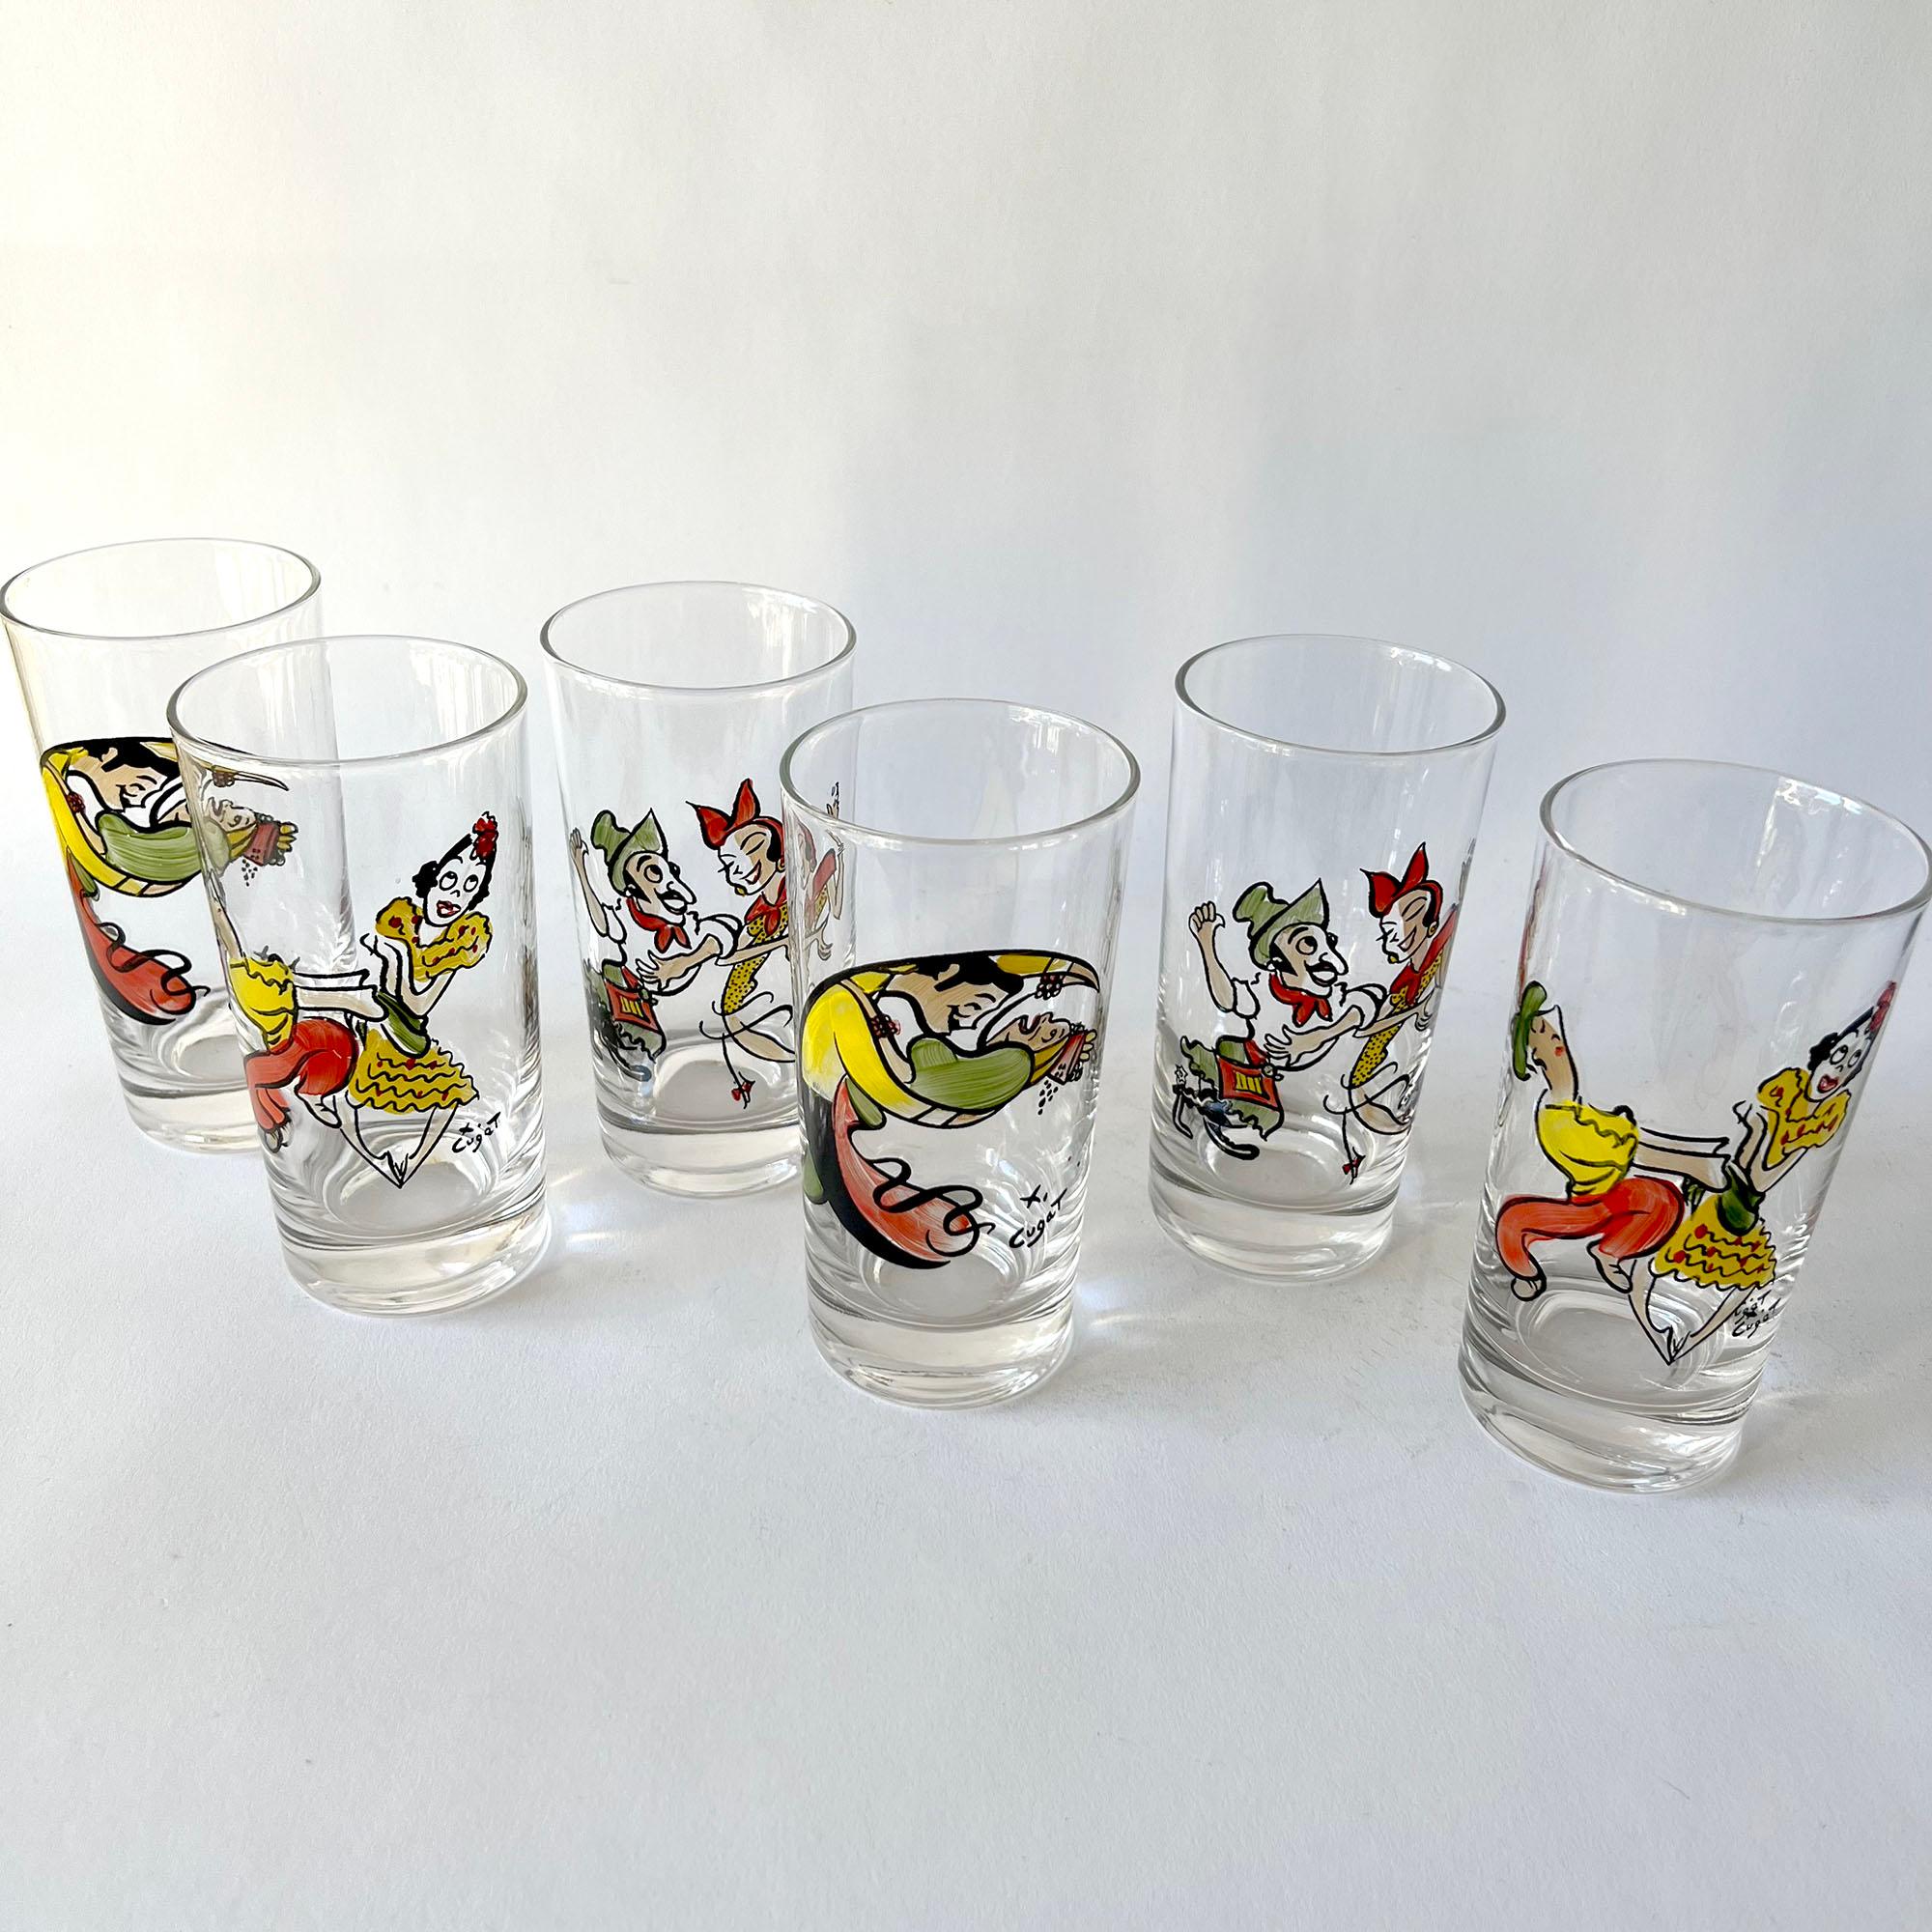 Rare, 1950s set six of hand painted drinking glasses drawn by bandleader extraordinaire, Xavier Cugat. Glasses measure 5.75